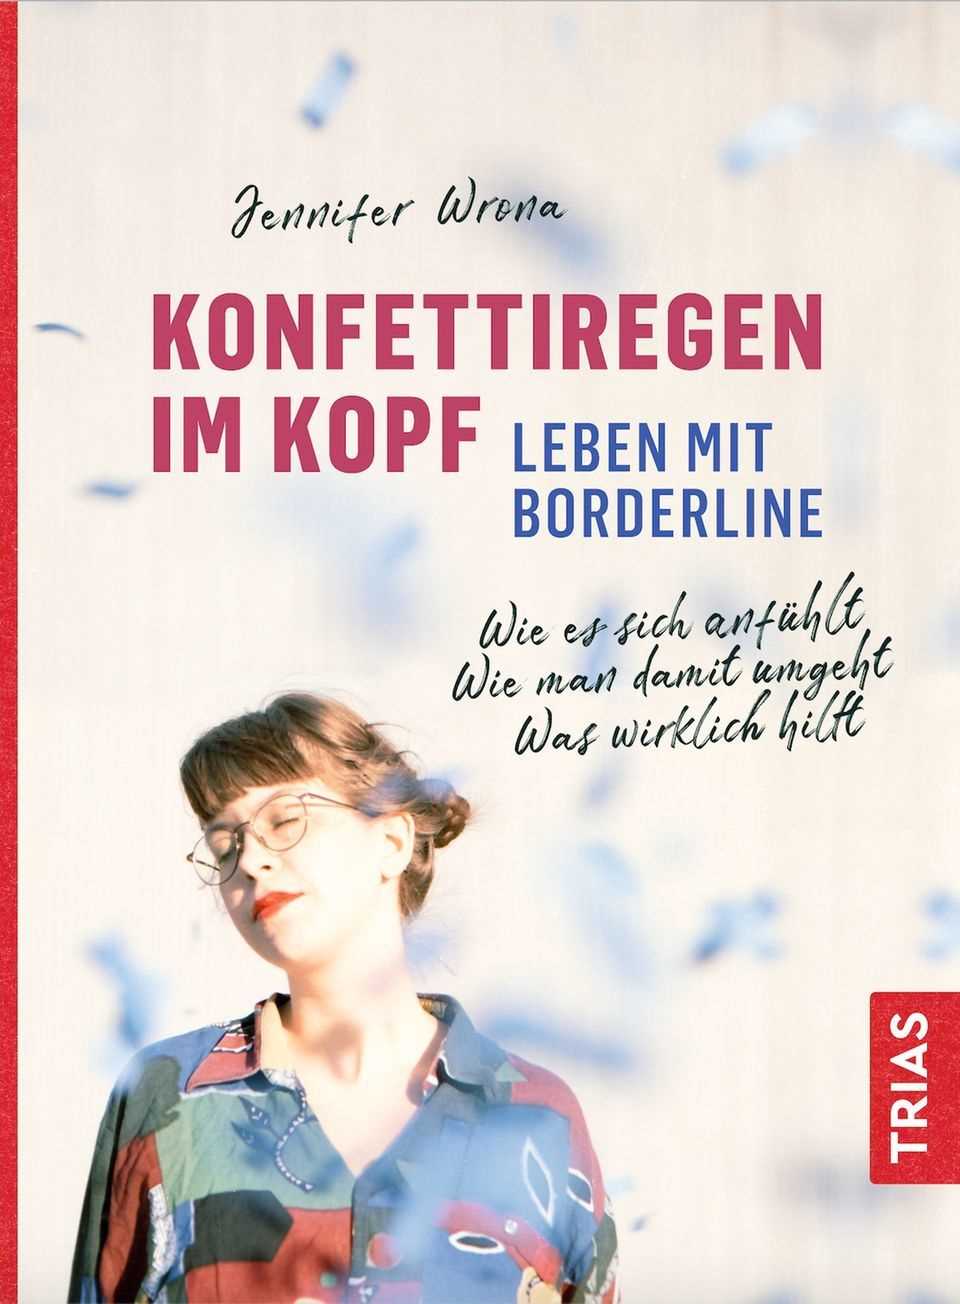 Jennifer Wrona's book "Confetti rain in your head - life with a borderline" was published by Trias-Verlag on February 10, 2021 and deals with her personal experiences with the disease.